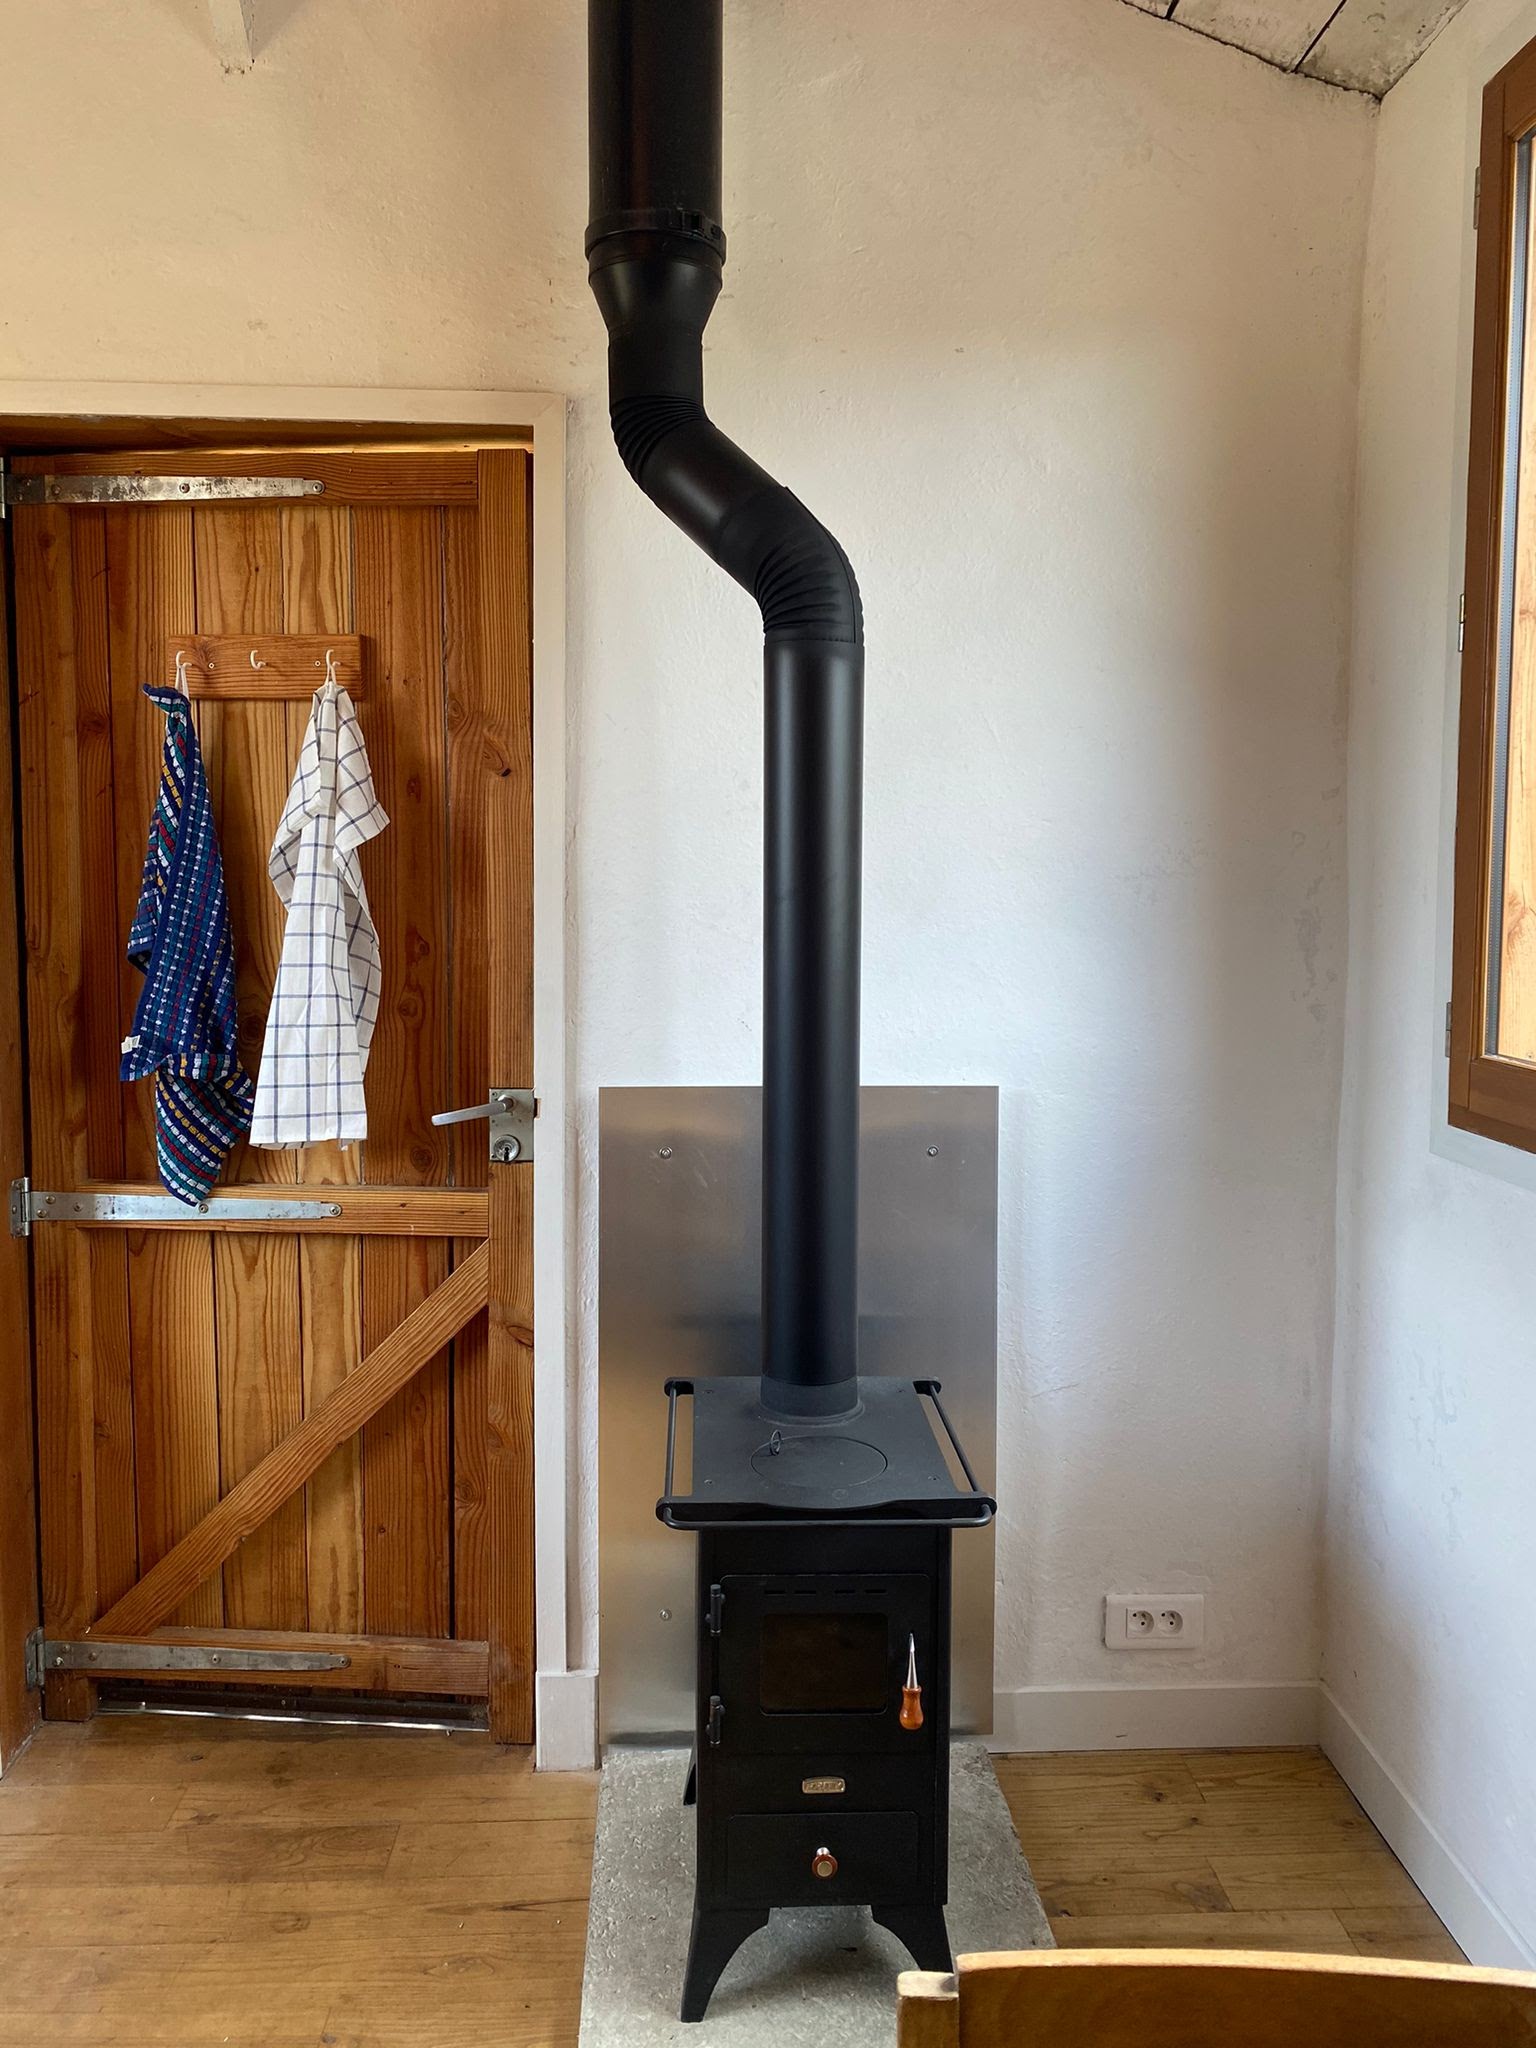 Pictured is the completed wood burning stove installaion